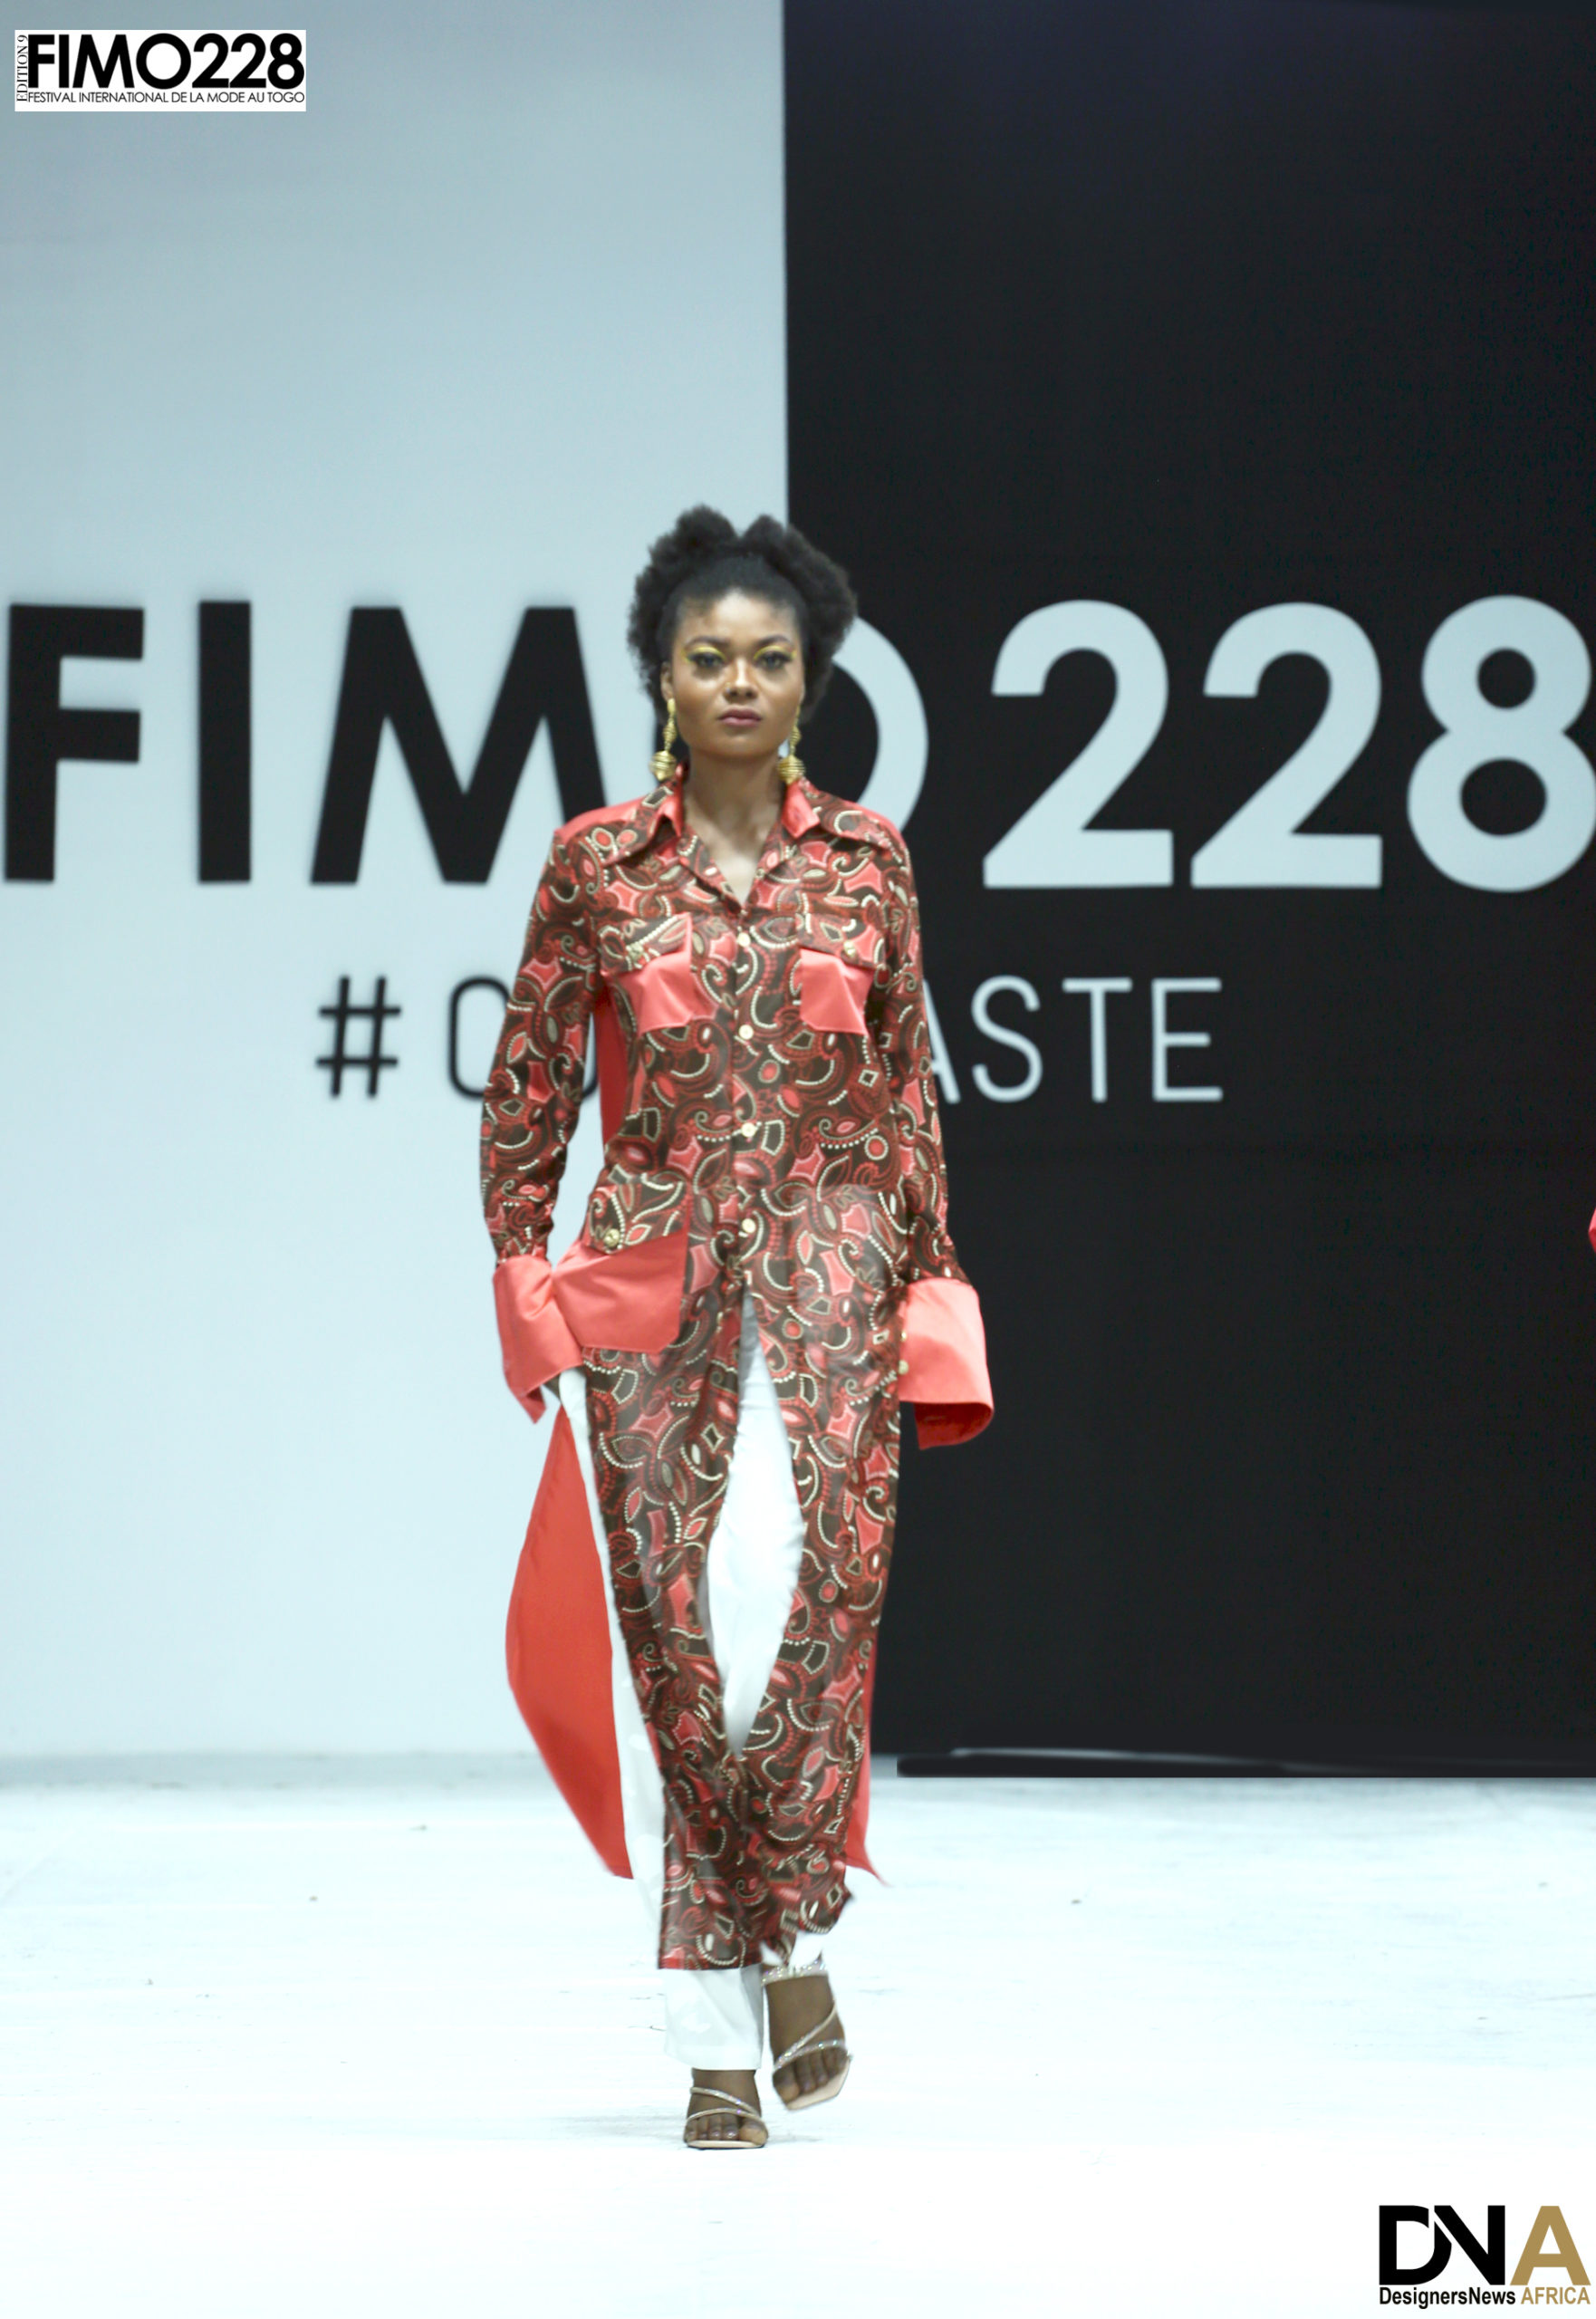 BEST AFRICAN MAGAZINE-FIMO-228-EDITION-9-2022-DEFILE-CLASSIQUE-DESIGNER-THE-MAN-Michelle-Ange-NACTO-DN-AFRICA-DNA-INTERNATIONAL-MEDIA-PARTNER-MD0A0252